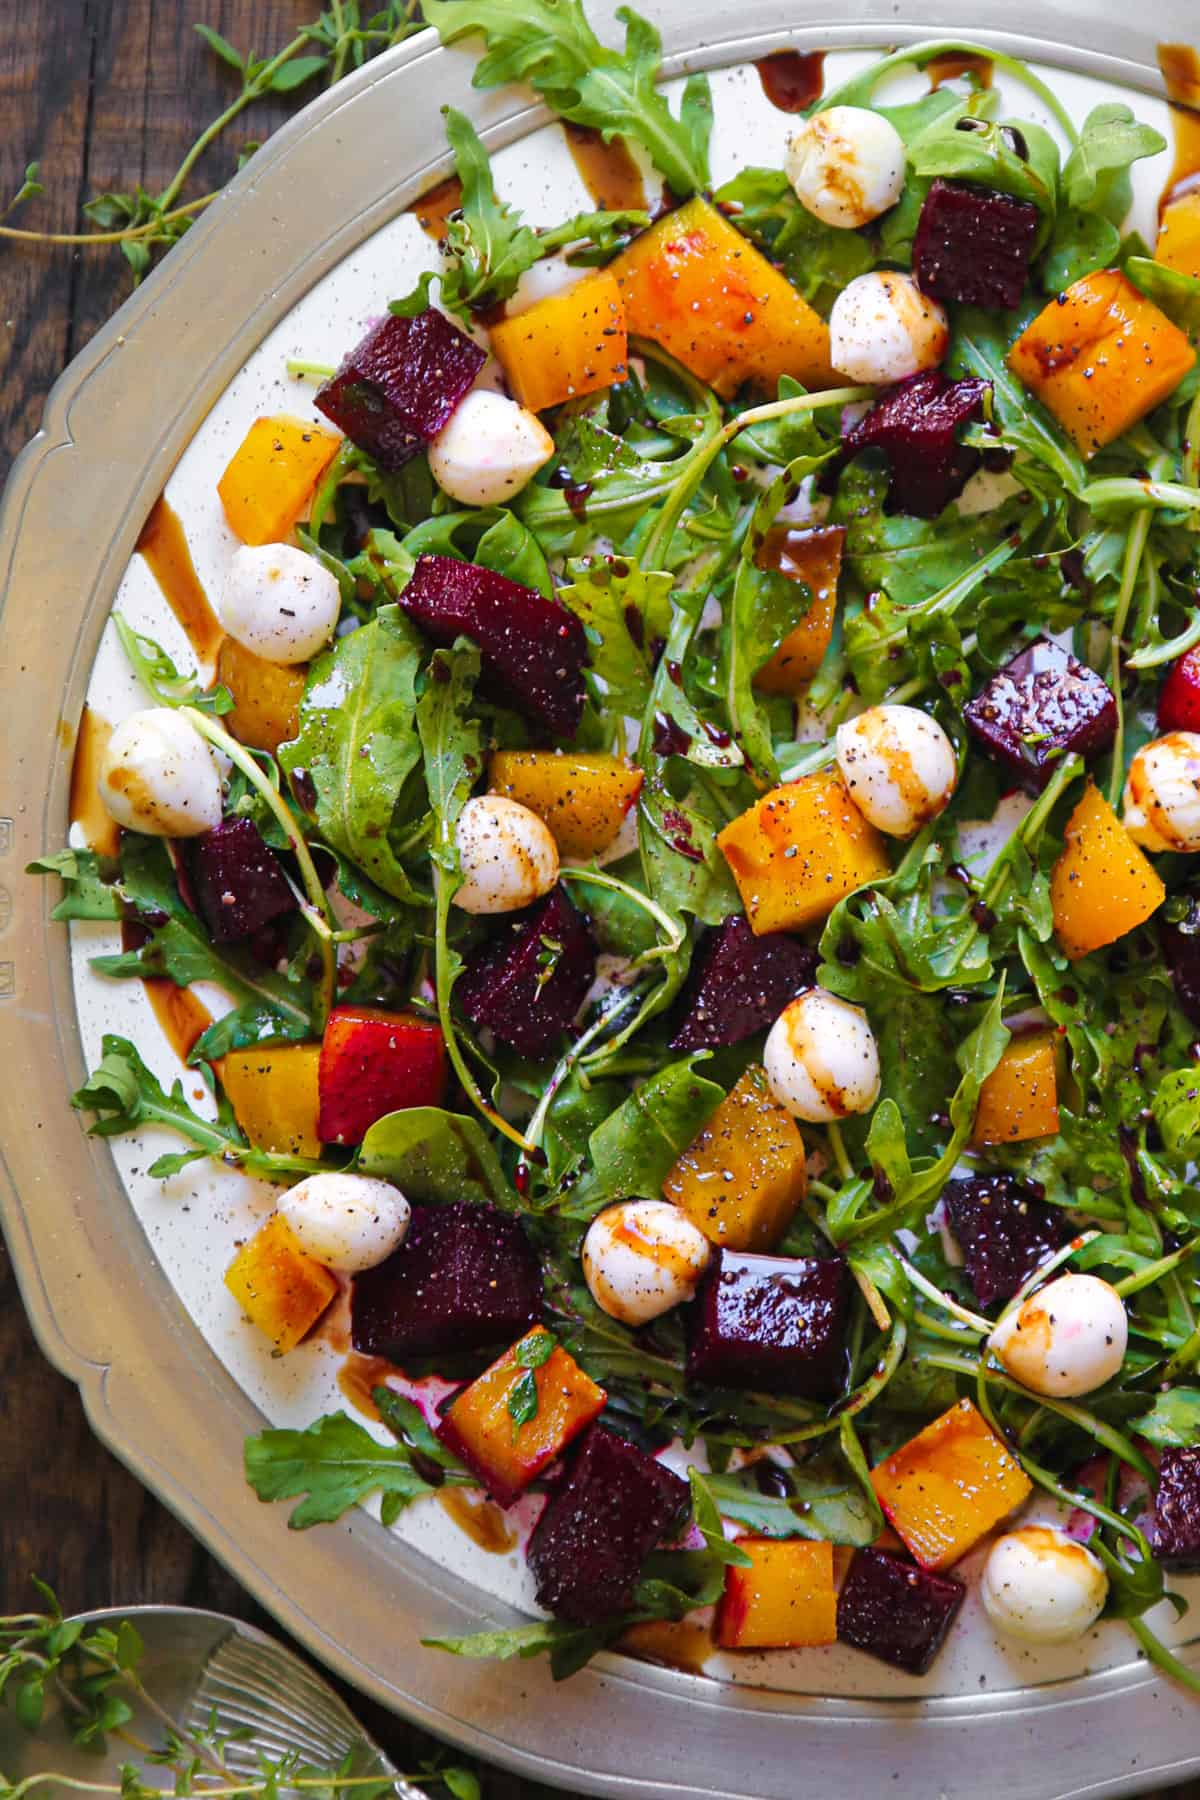 Beet and Mozzarella Cheese Salad with Arugula and Balsamic Dressing - on a white plate.